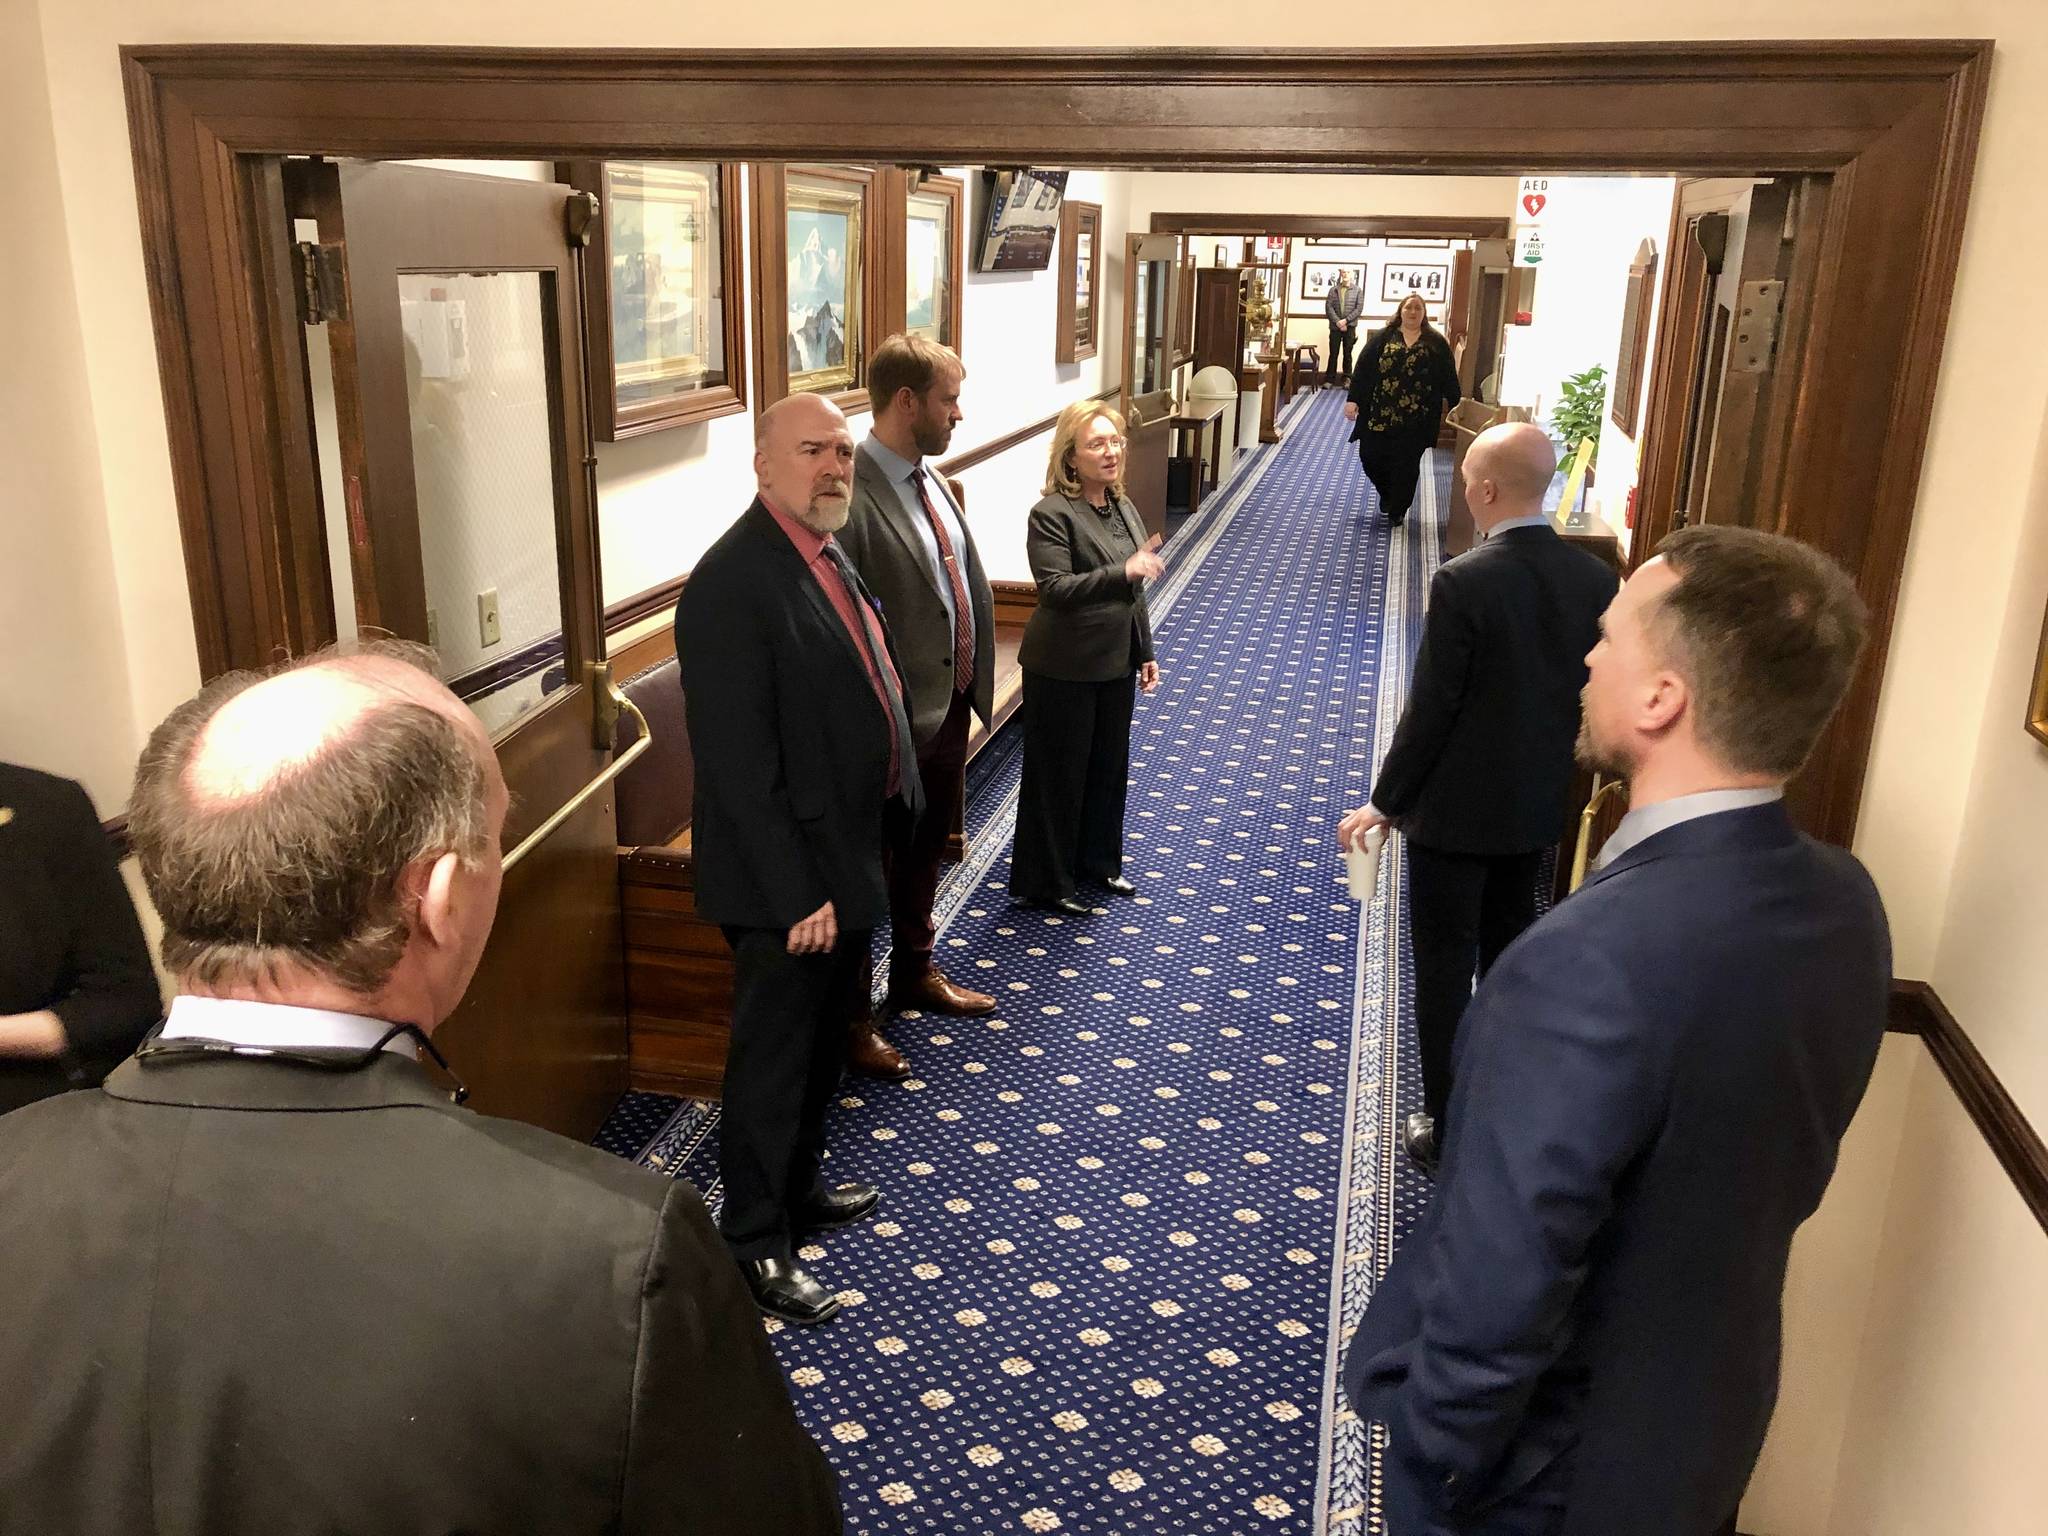 House representatives debate the supplemental budget bill in the halls of the Capitol on Wednesday March 25, 2020 (Peter Segall | Juneau Empire)